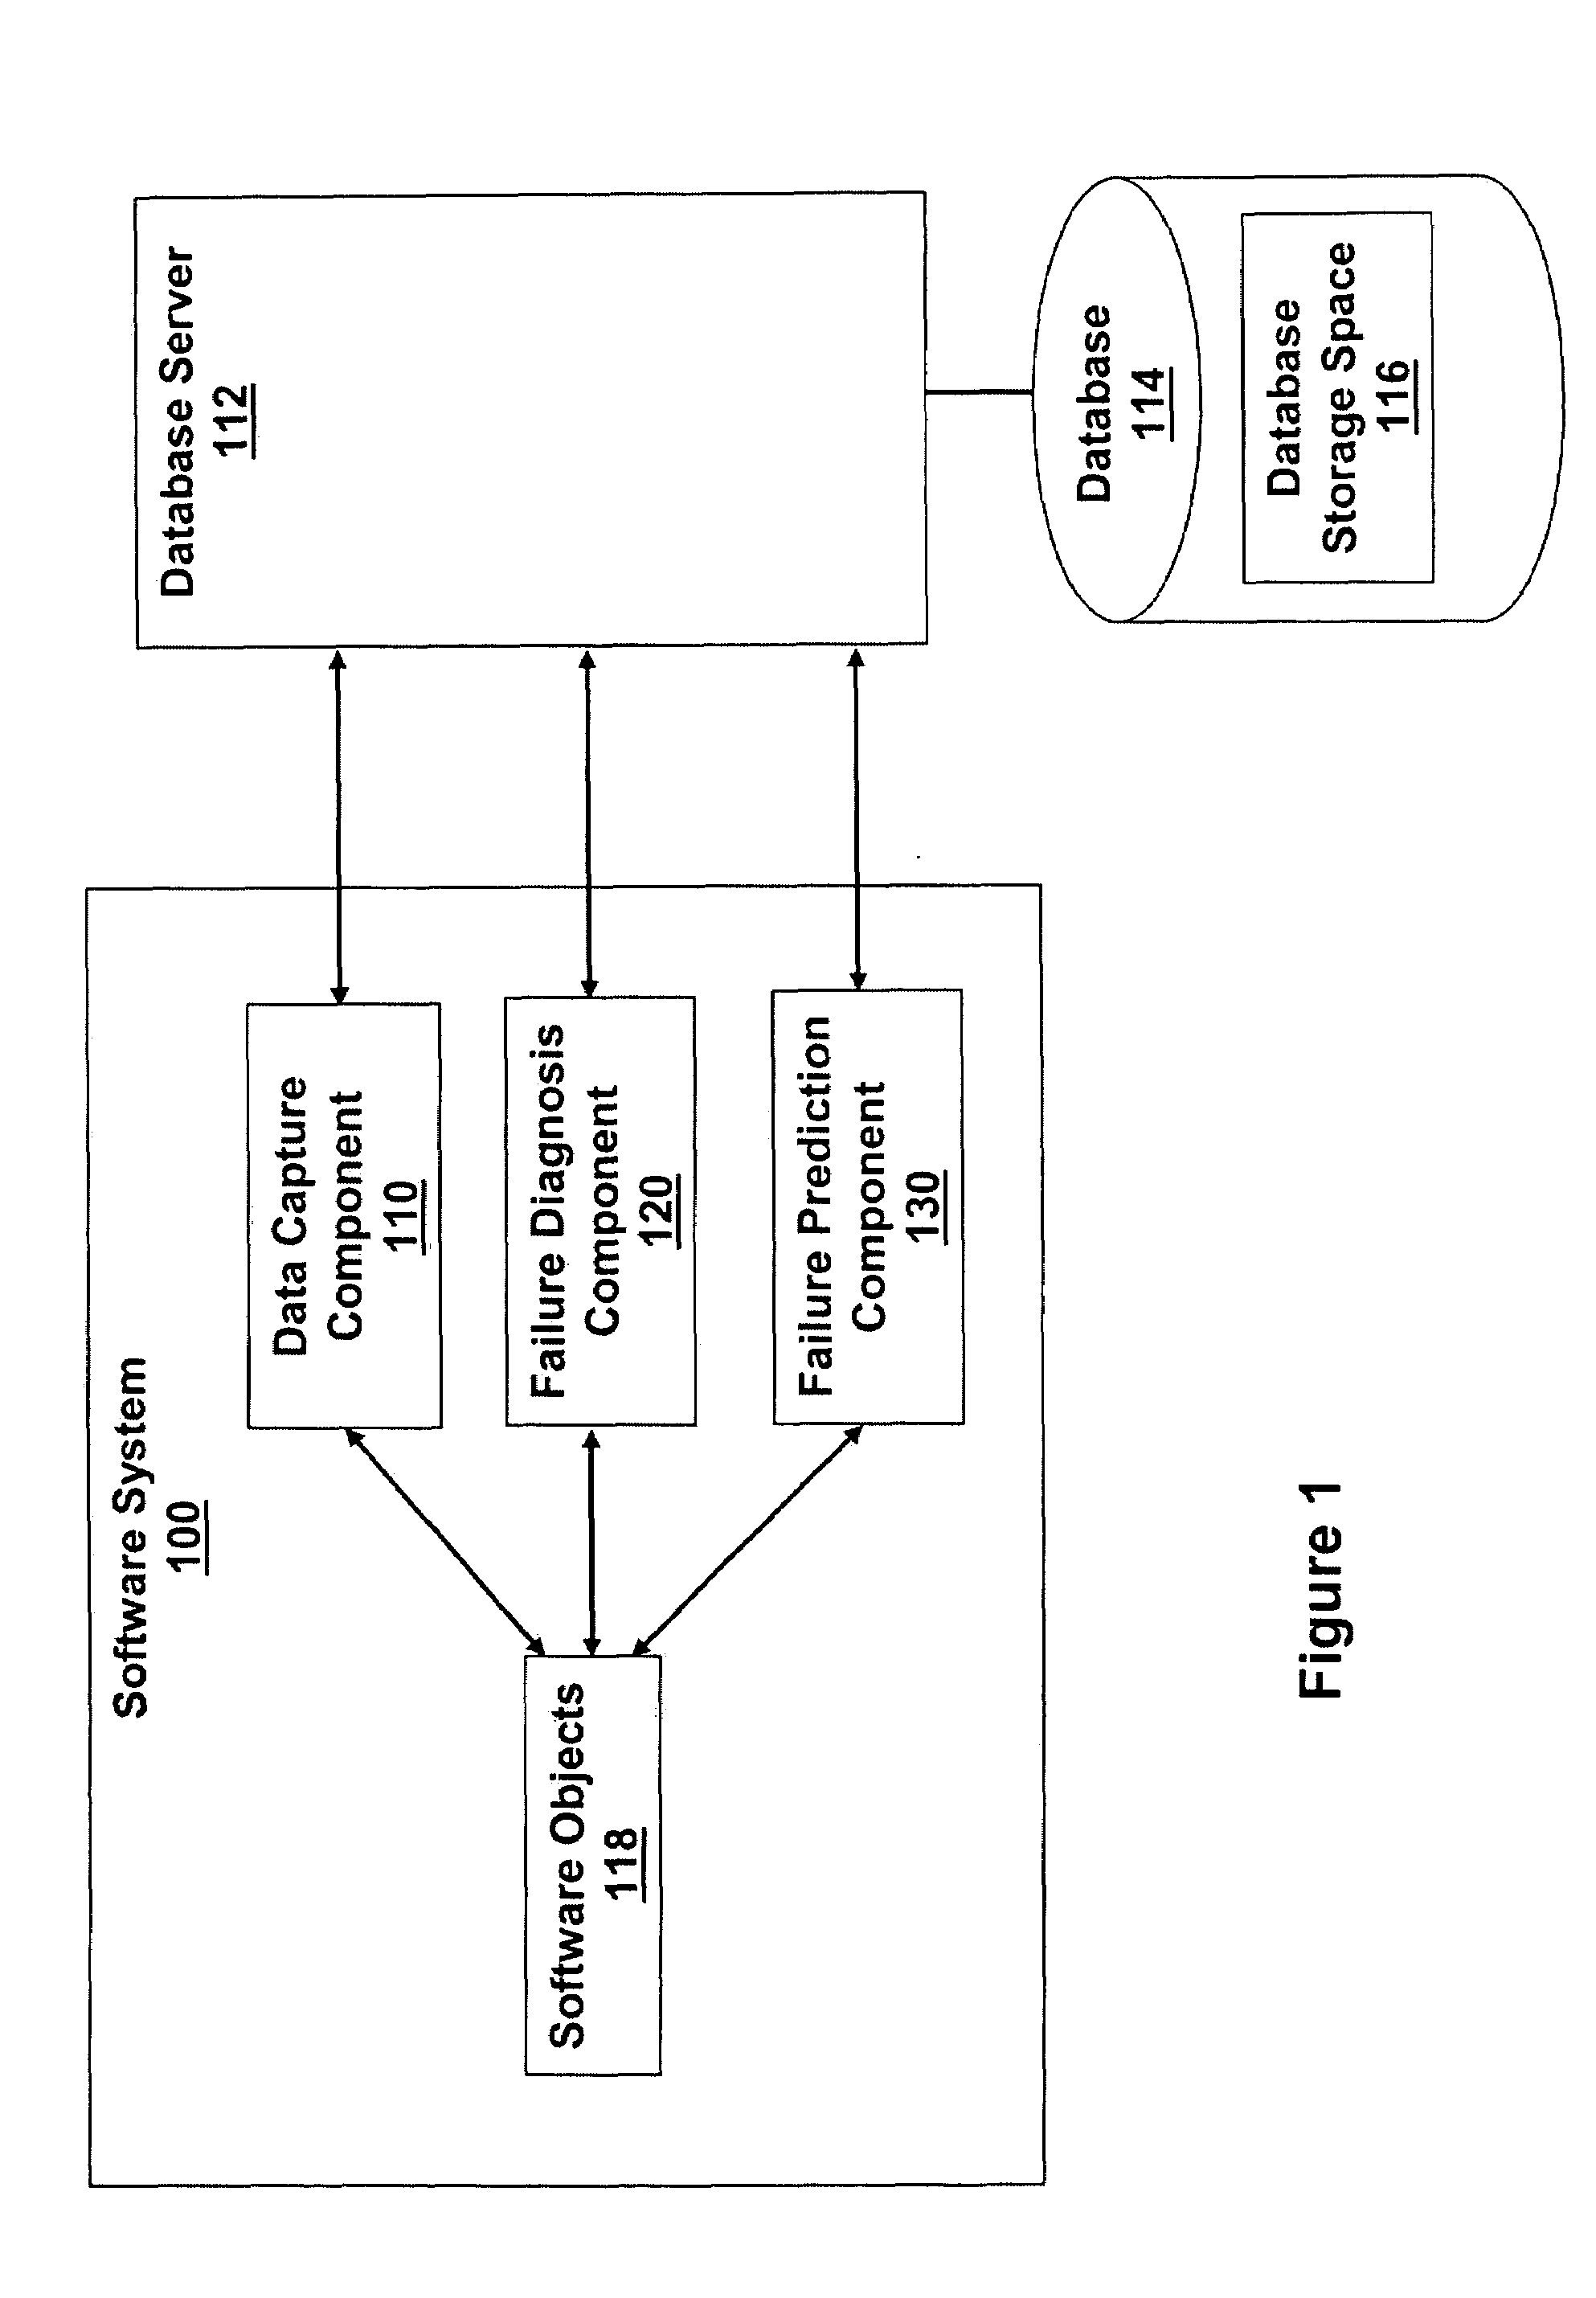 System and method of fault detection, diagnosis and prevention for complex computing systems